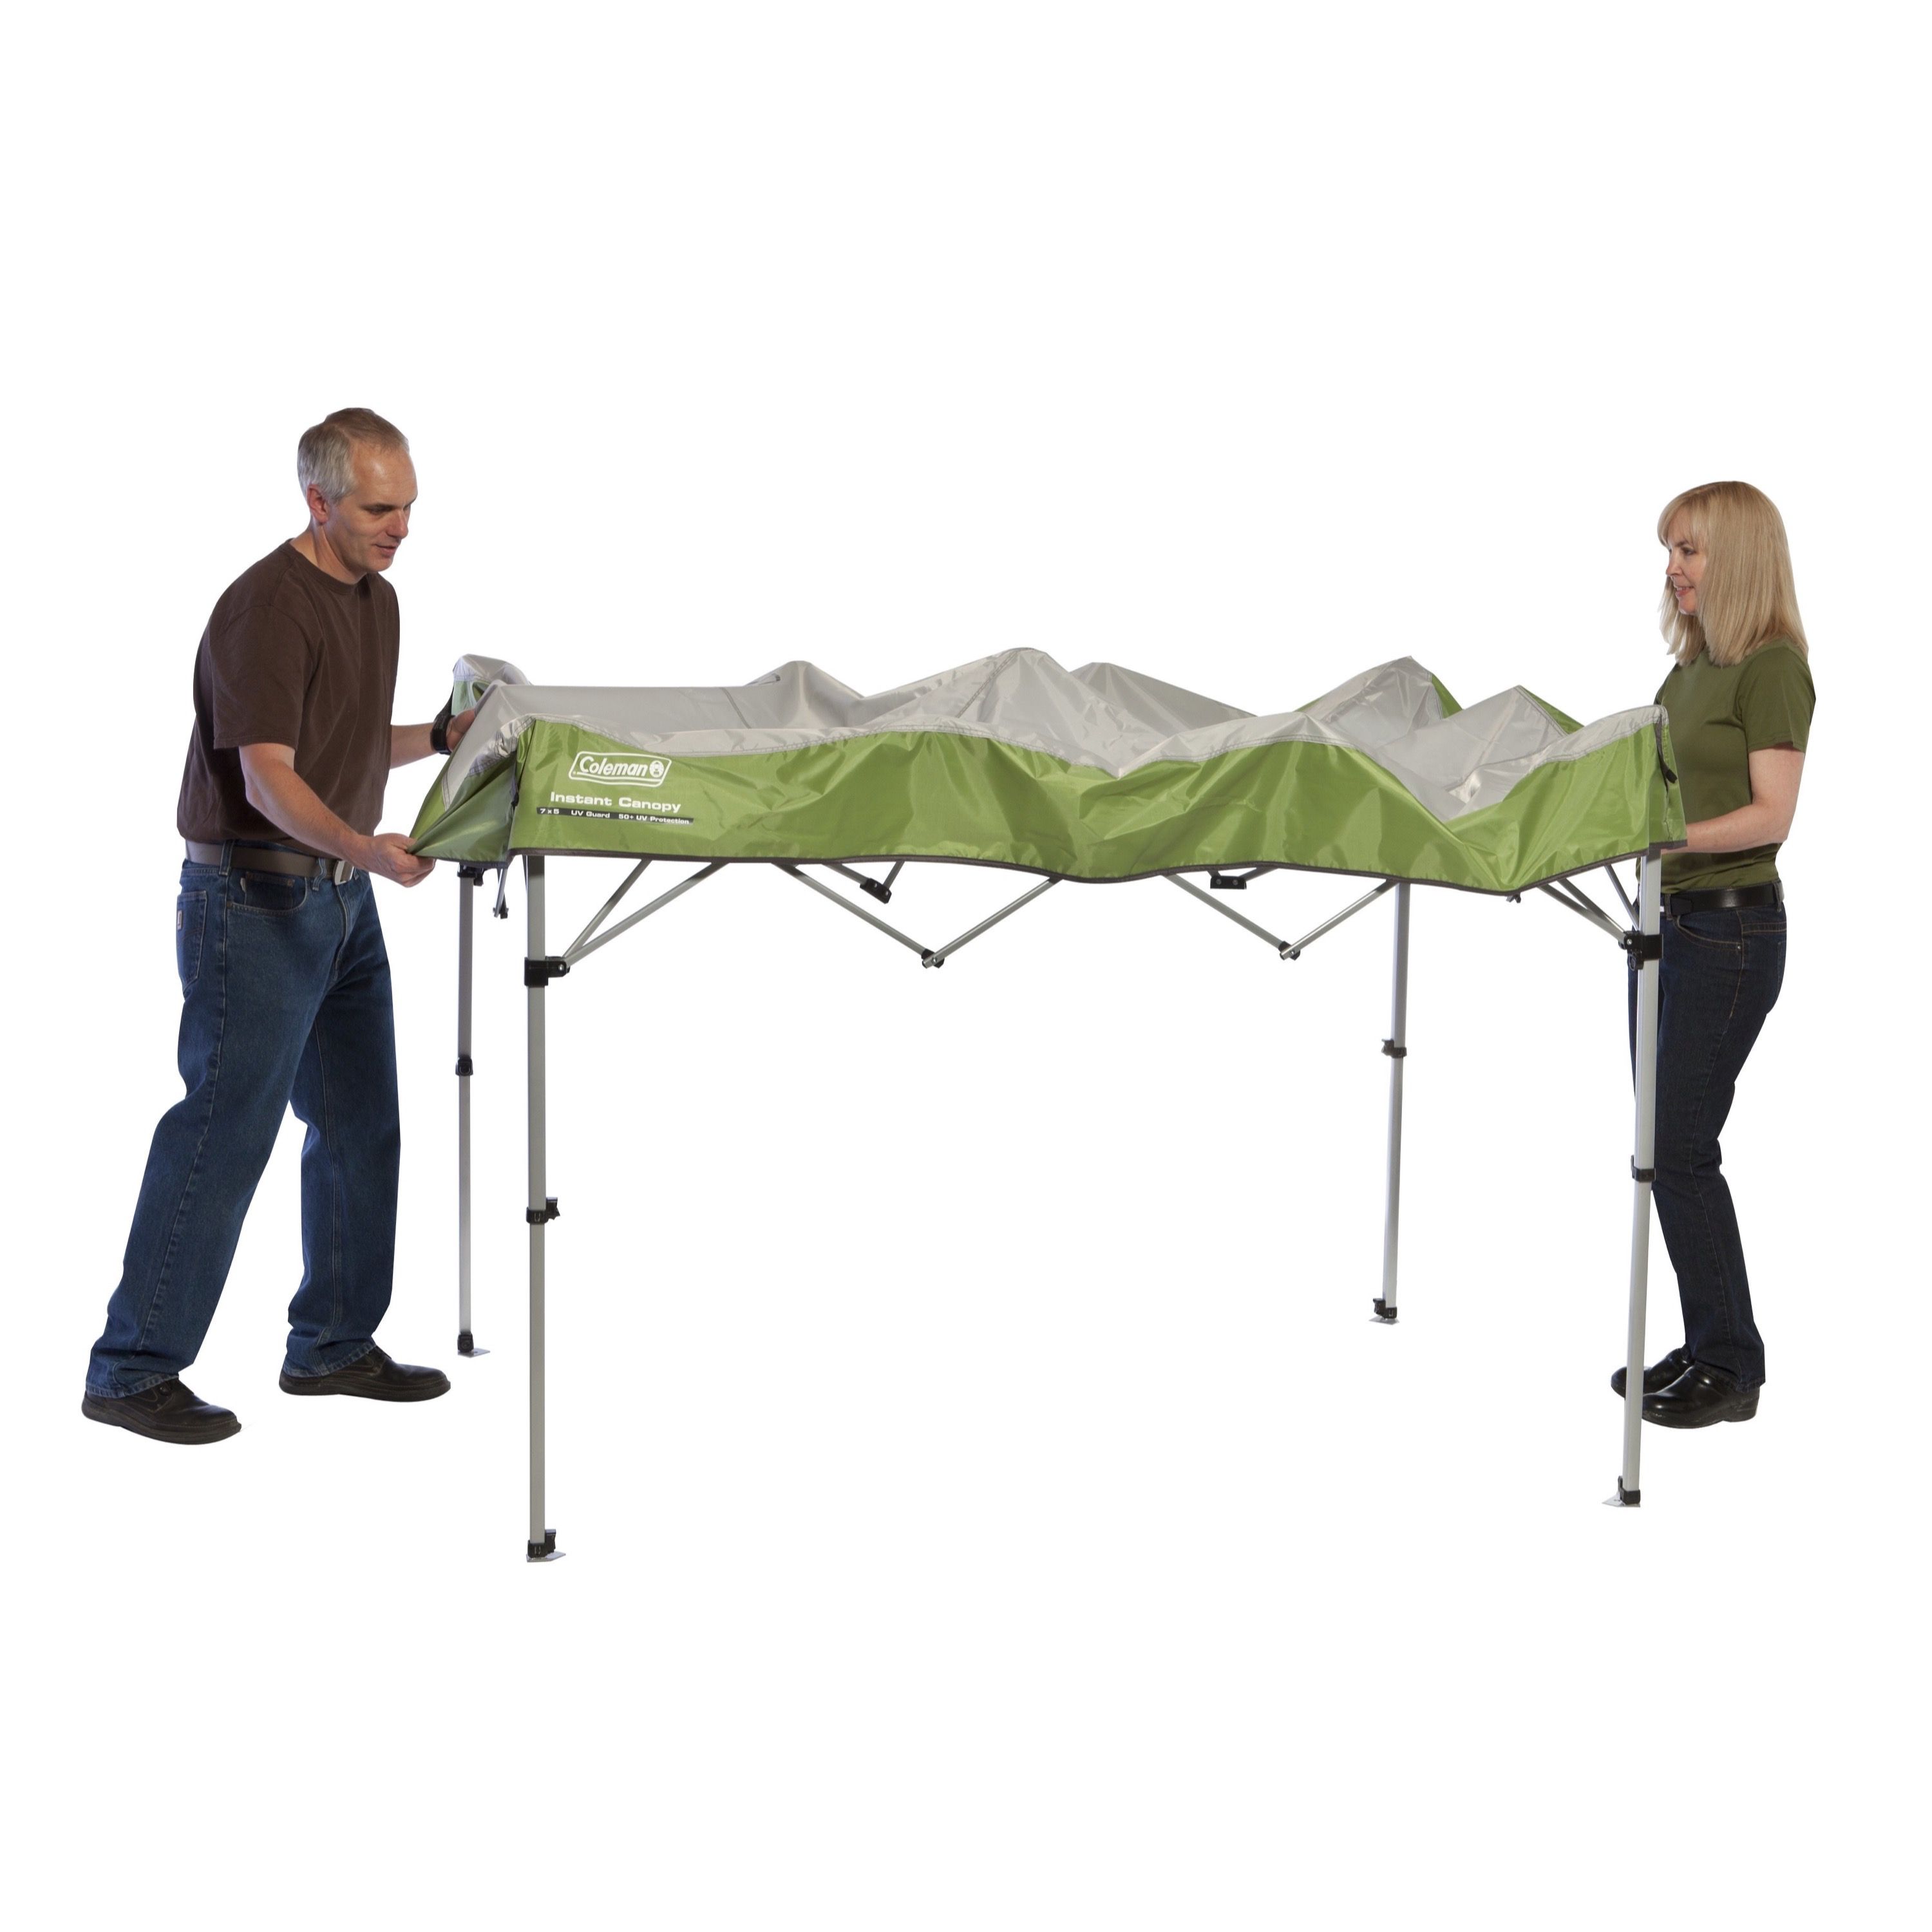 Coleman 7' x 5' Canopy Sun Shelter Tent with Instant Setup, Green - image 5 of 10